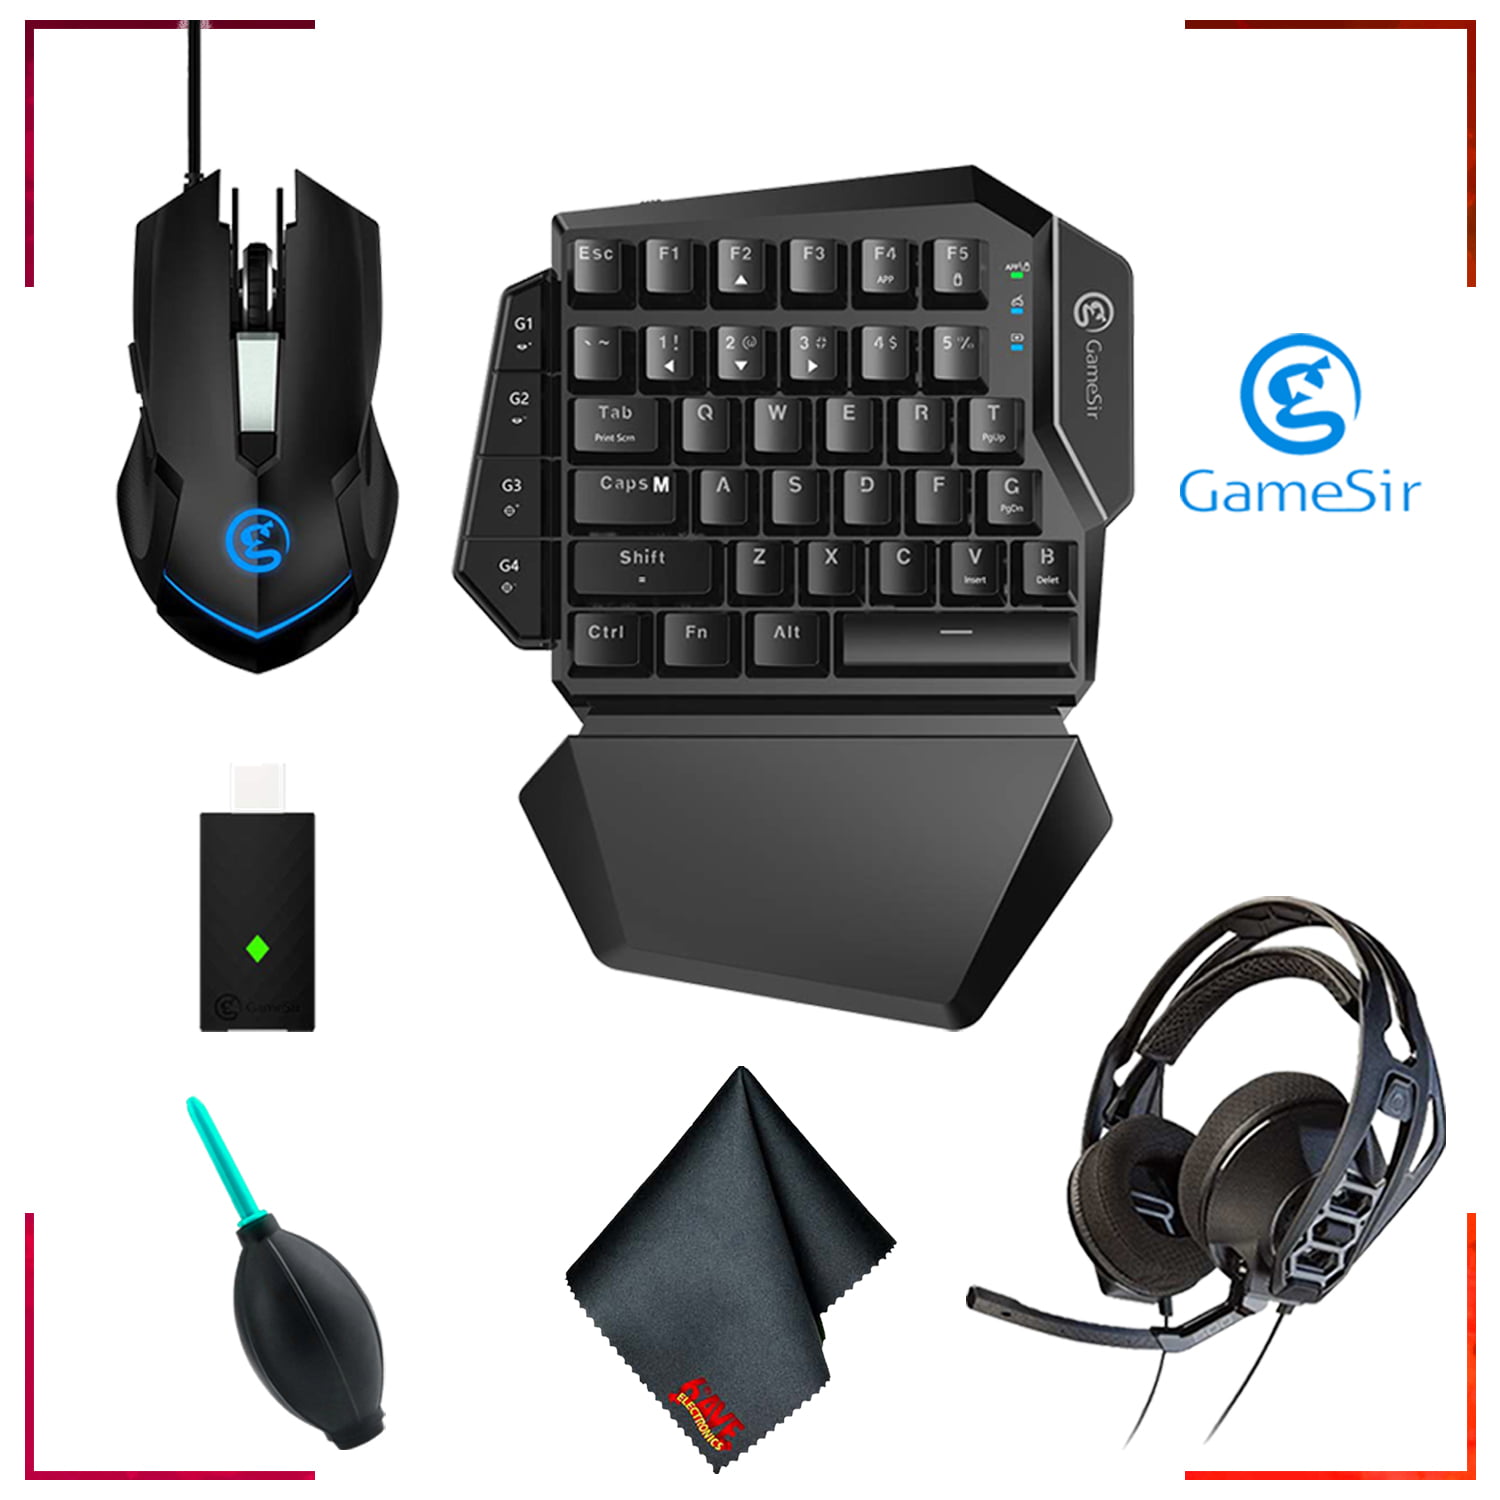 Gamesir Vx Aimswitch Keyboard And Mouse Adapter Walmart Com